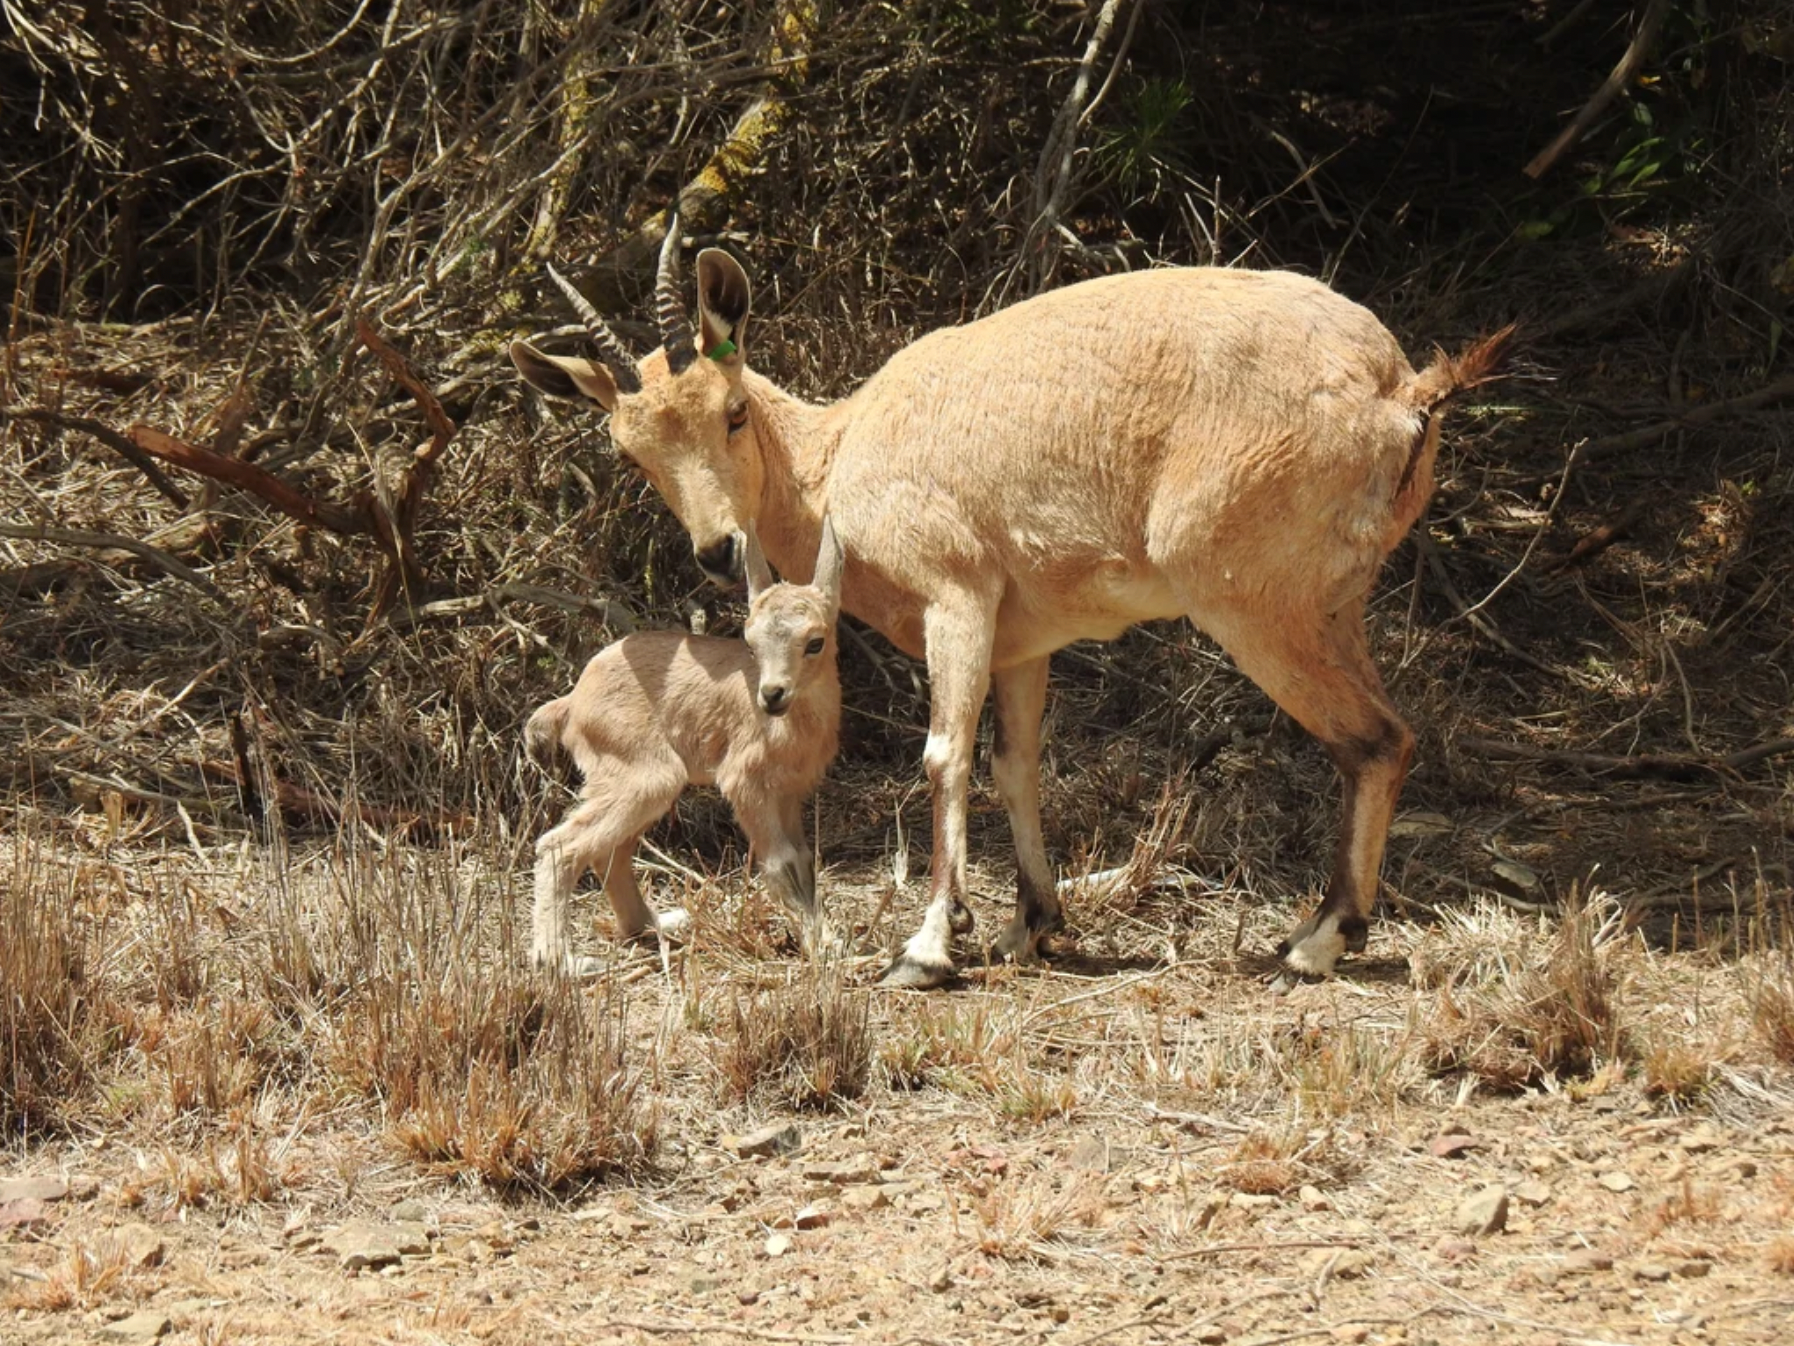 One of the eight kids that have been born this year after a herd of 15 native ibexes were released into their natural habitat last December, in cooperation with the National Center for Wildlife